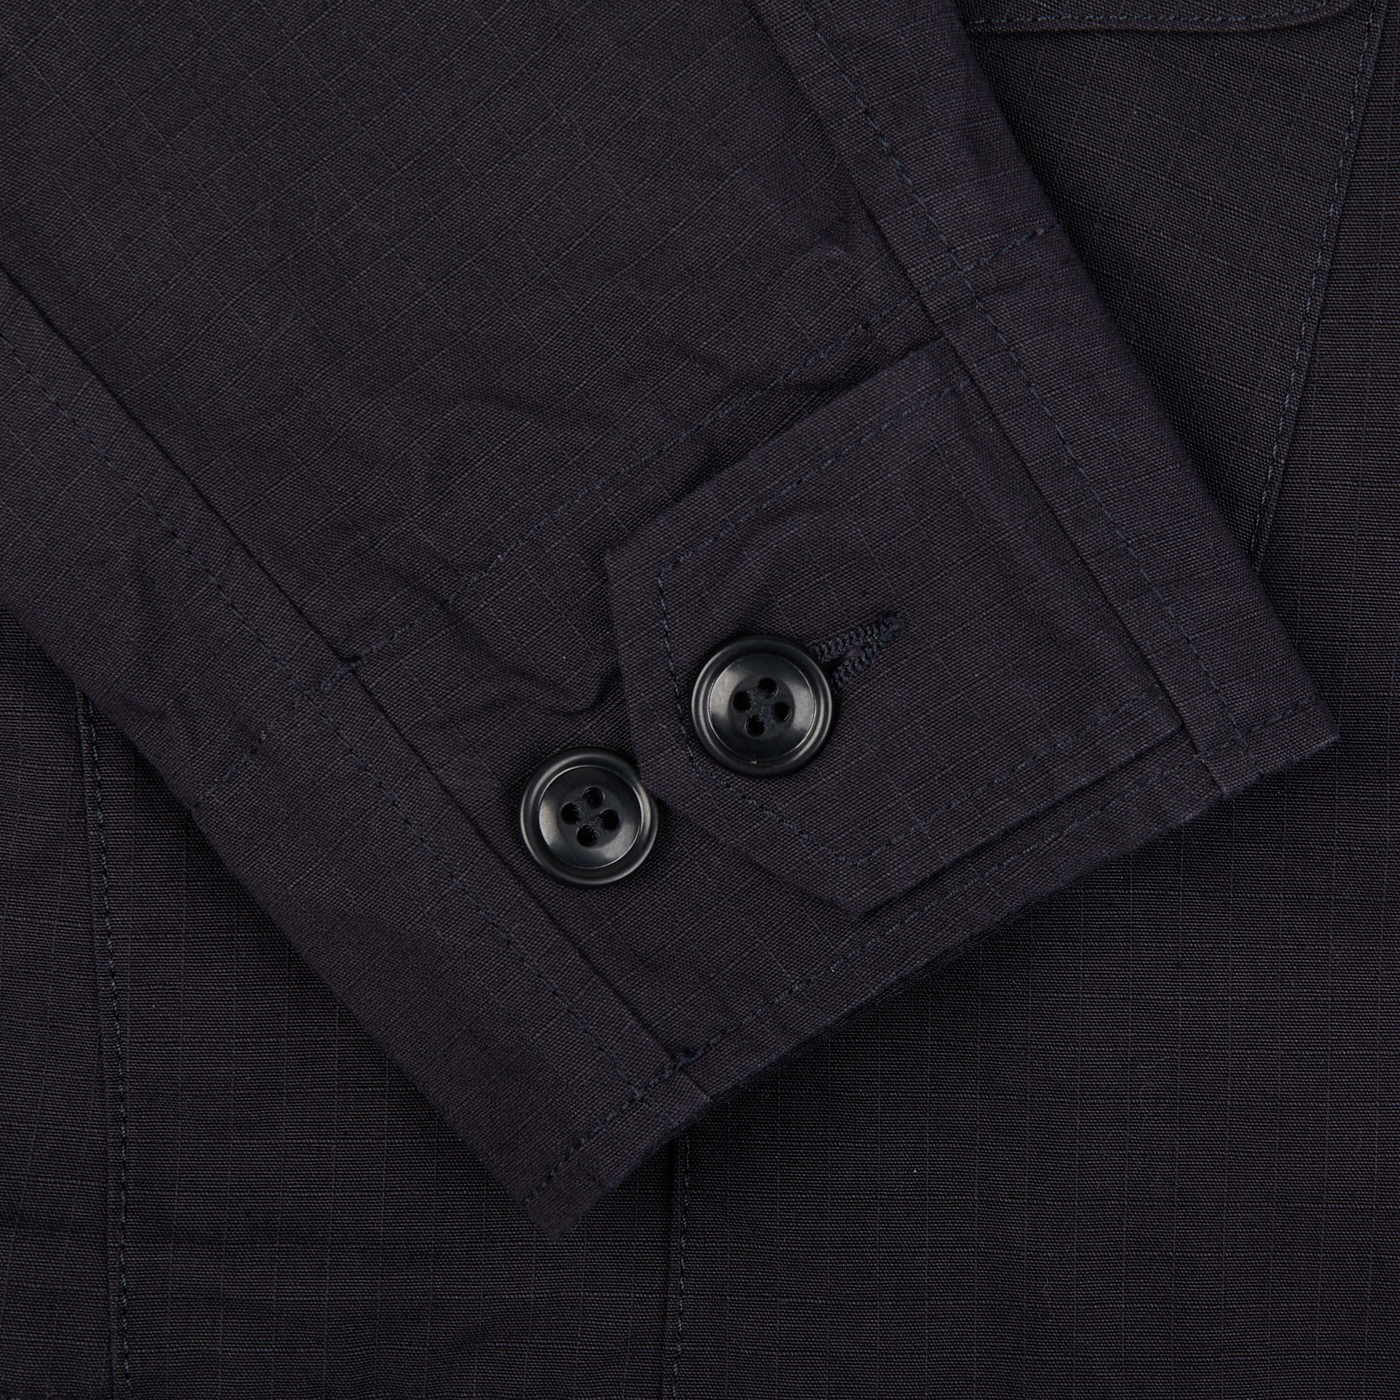 A close up of a Manifattura Ceccarelli Navy Blue Ripstop Cotton Bush Jacket with buttons made of ripstop cotton.